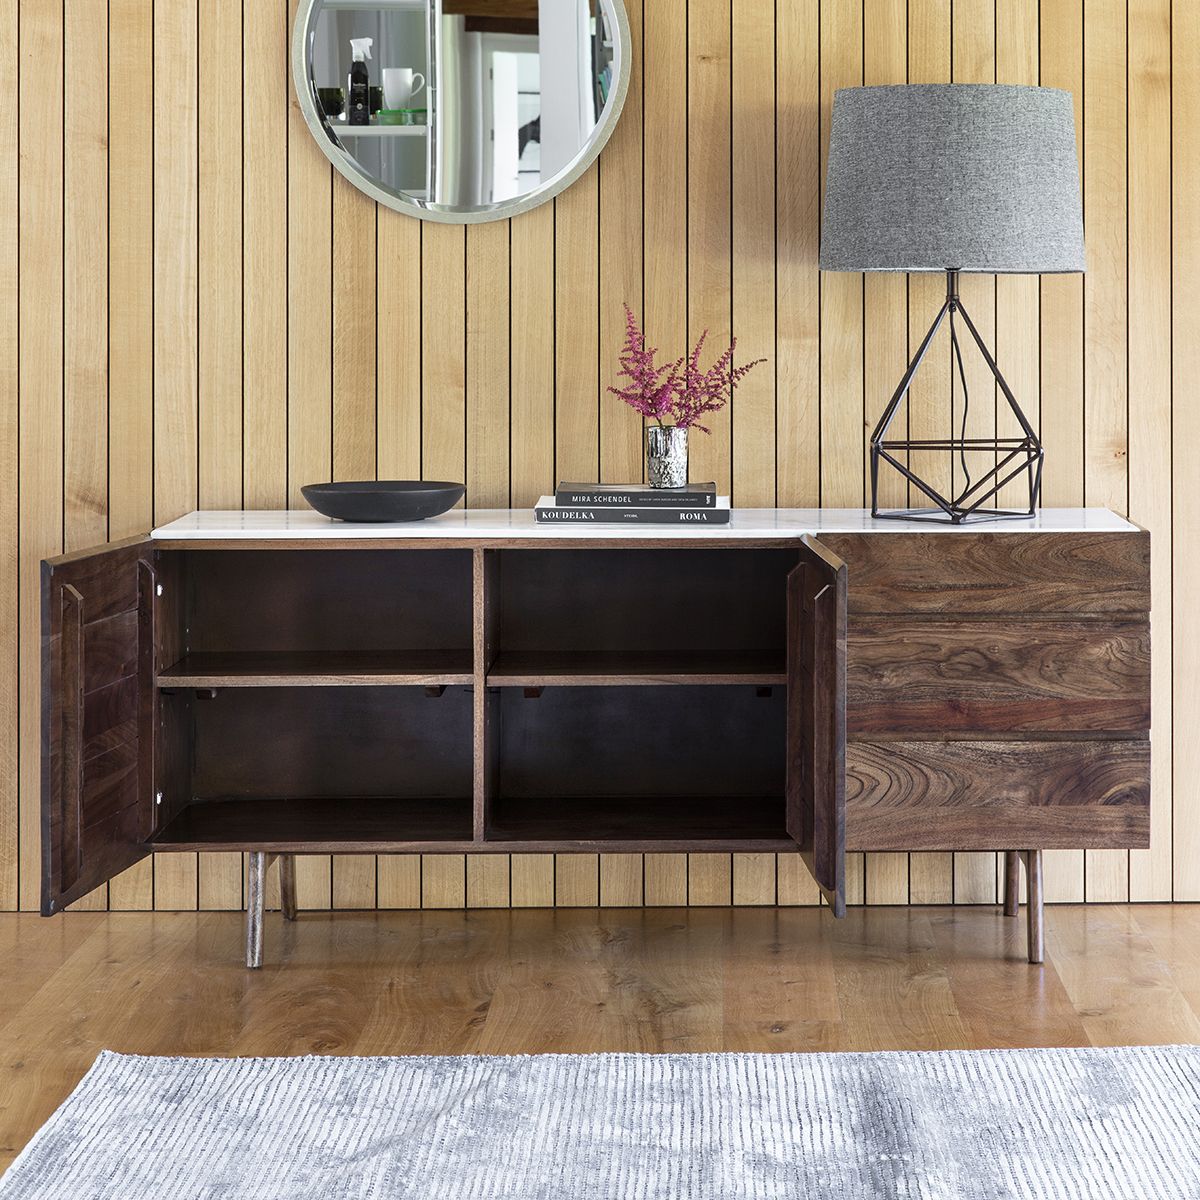 Marello Walnut Stained Solid Acacia Sideboard with Marble Top